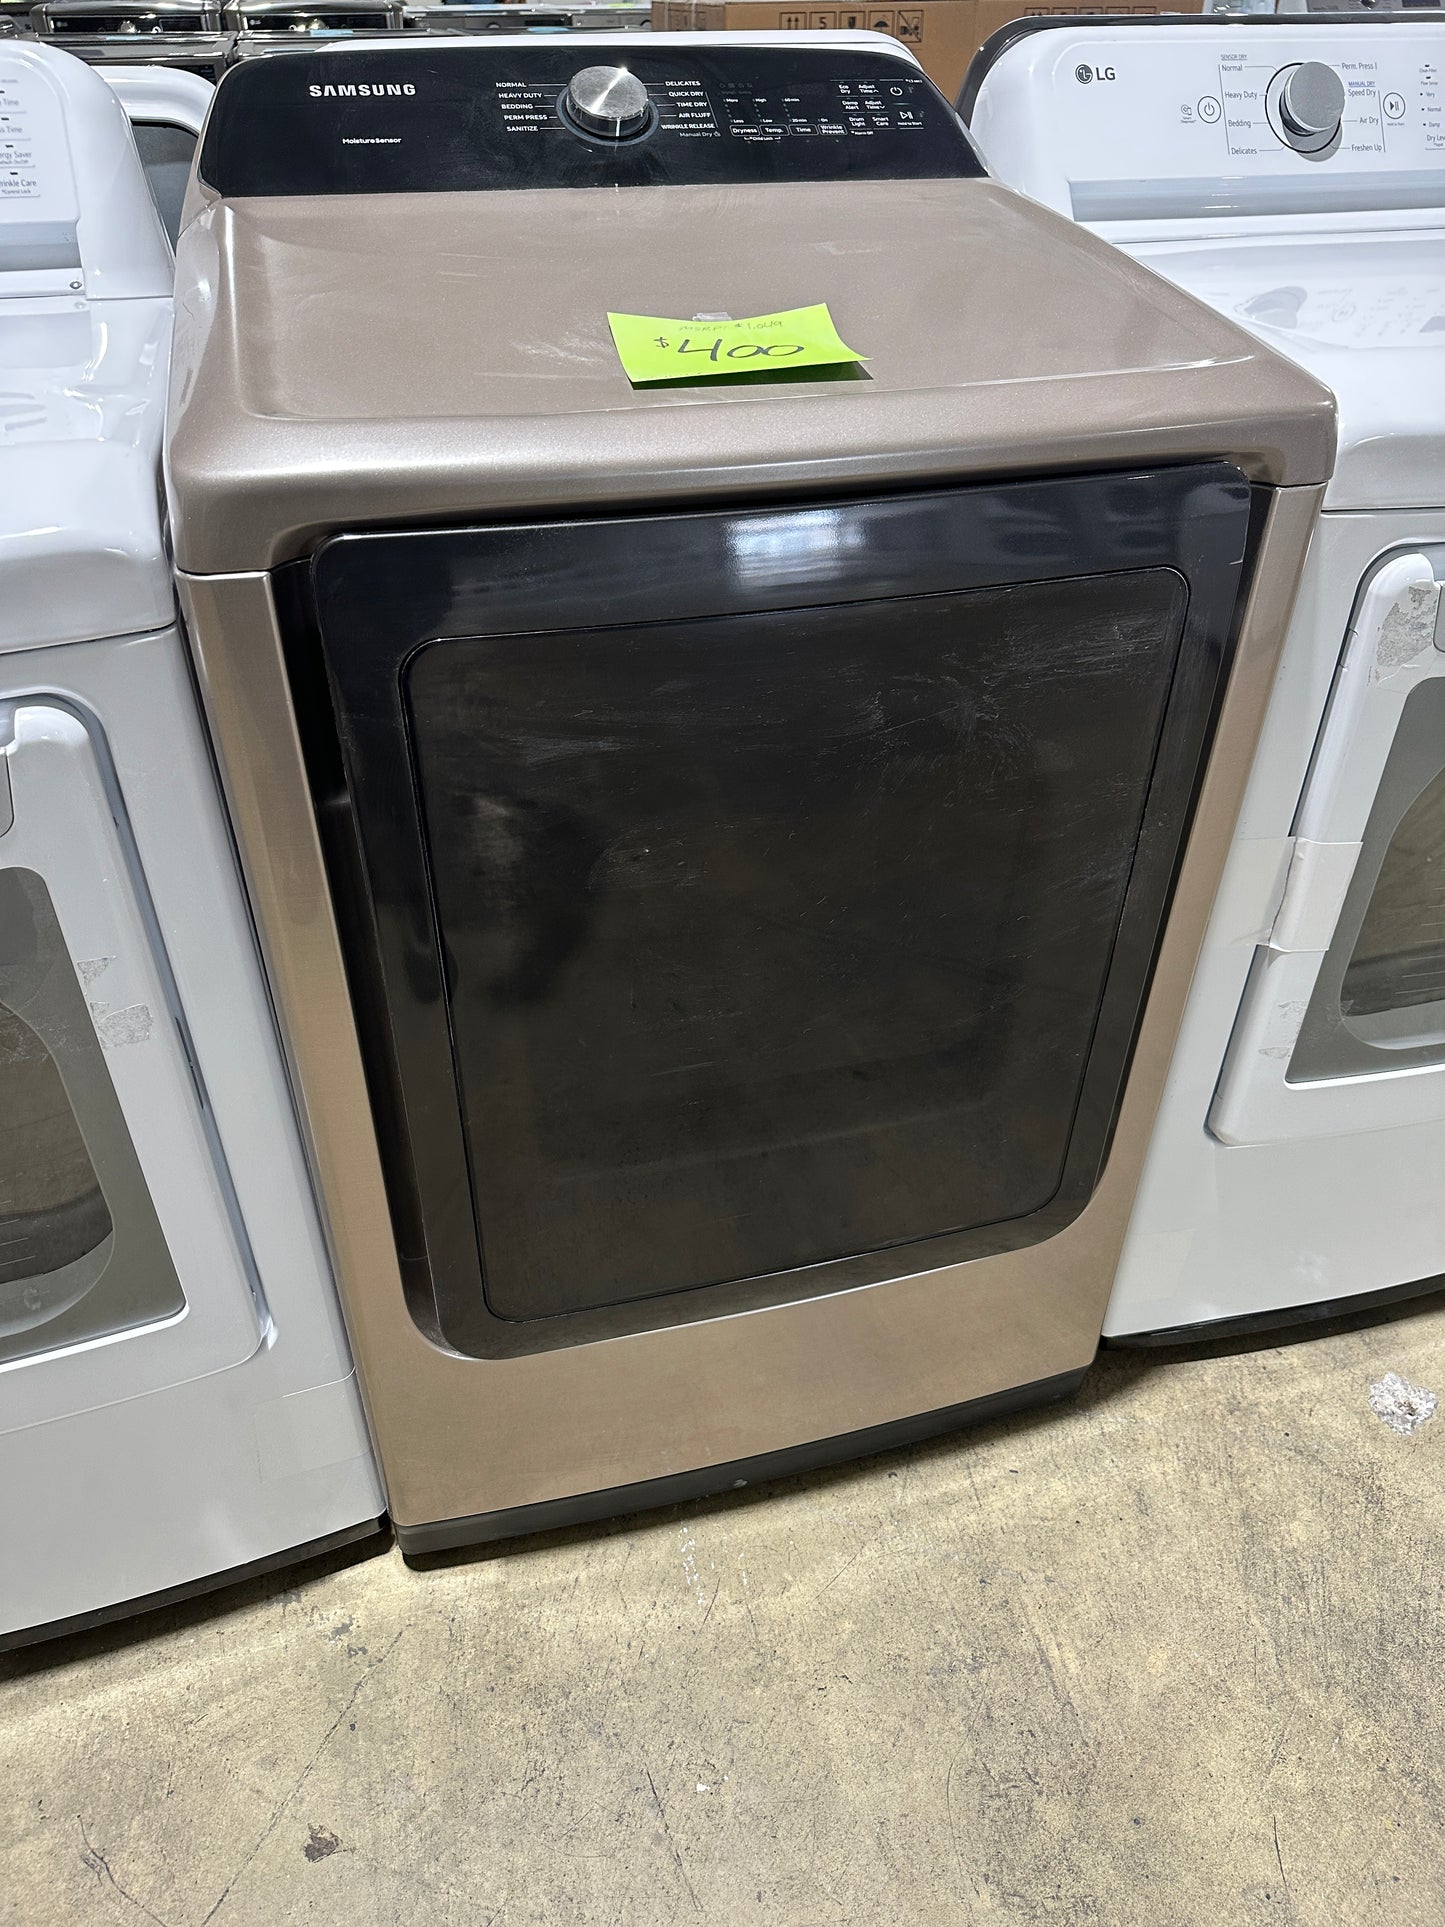 GREAT SAMSUNG DRYER WITH SENSOR DRY - DRY11406S DVG50T5300C